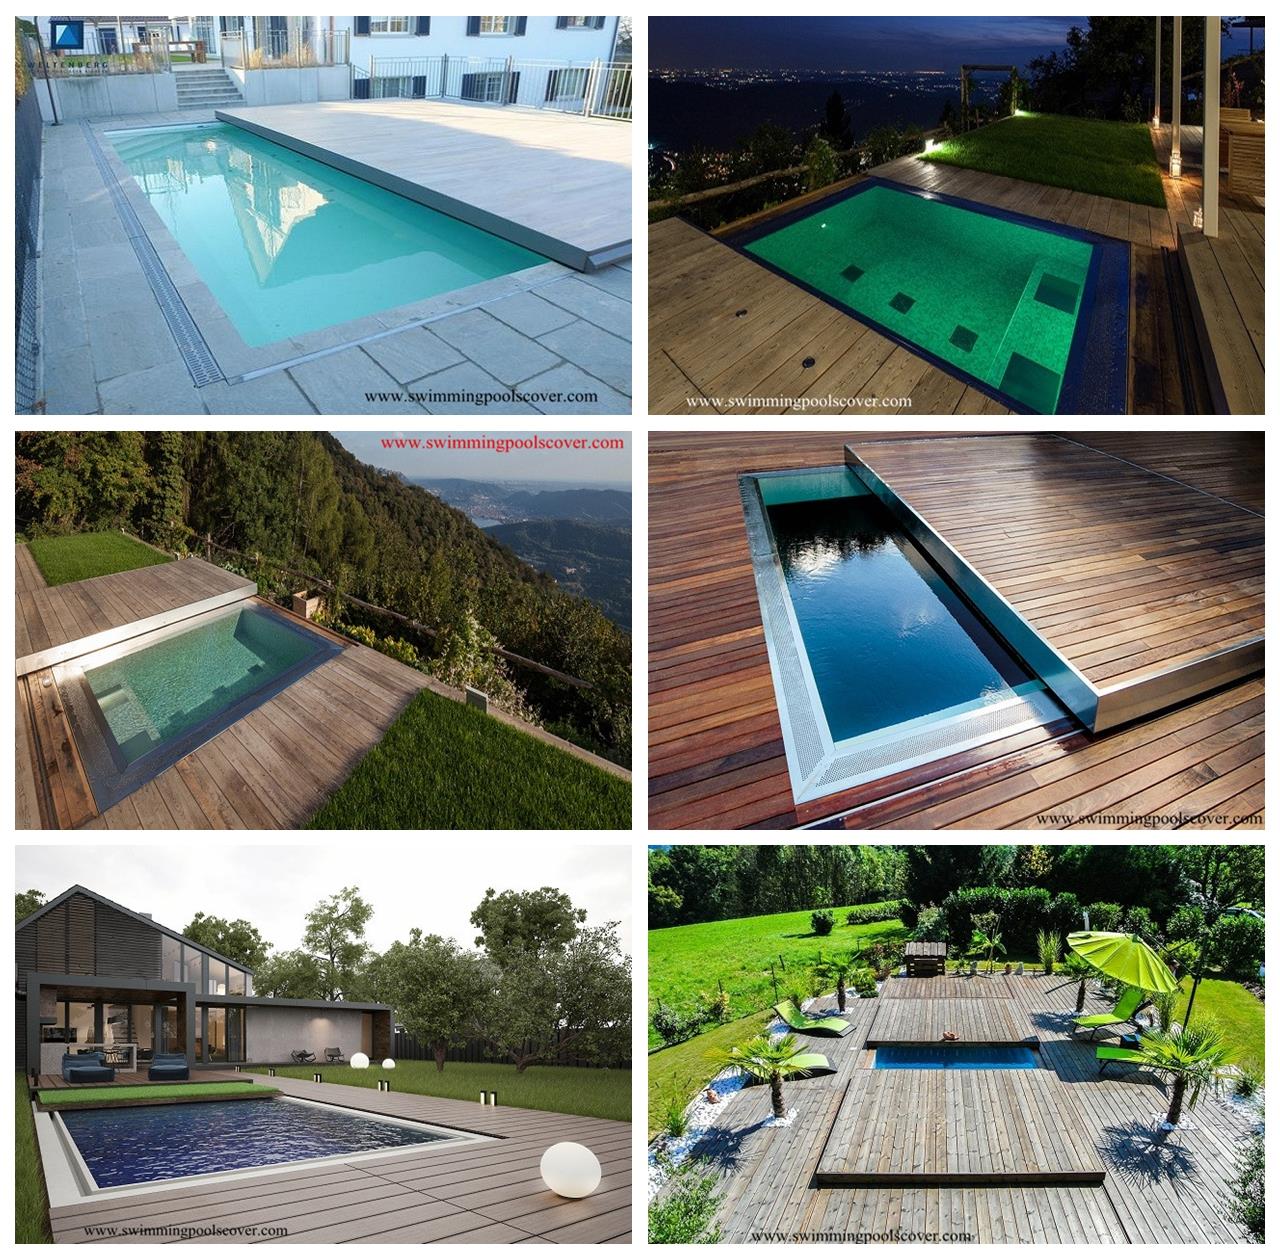 Automatic Flat Push Swimming Pool Covers Above Ground.jpg